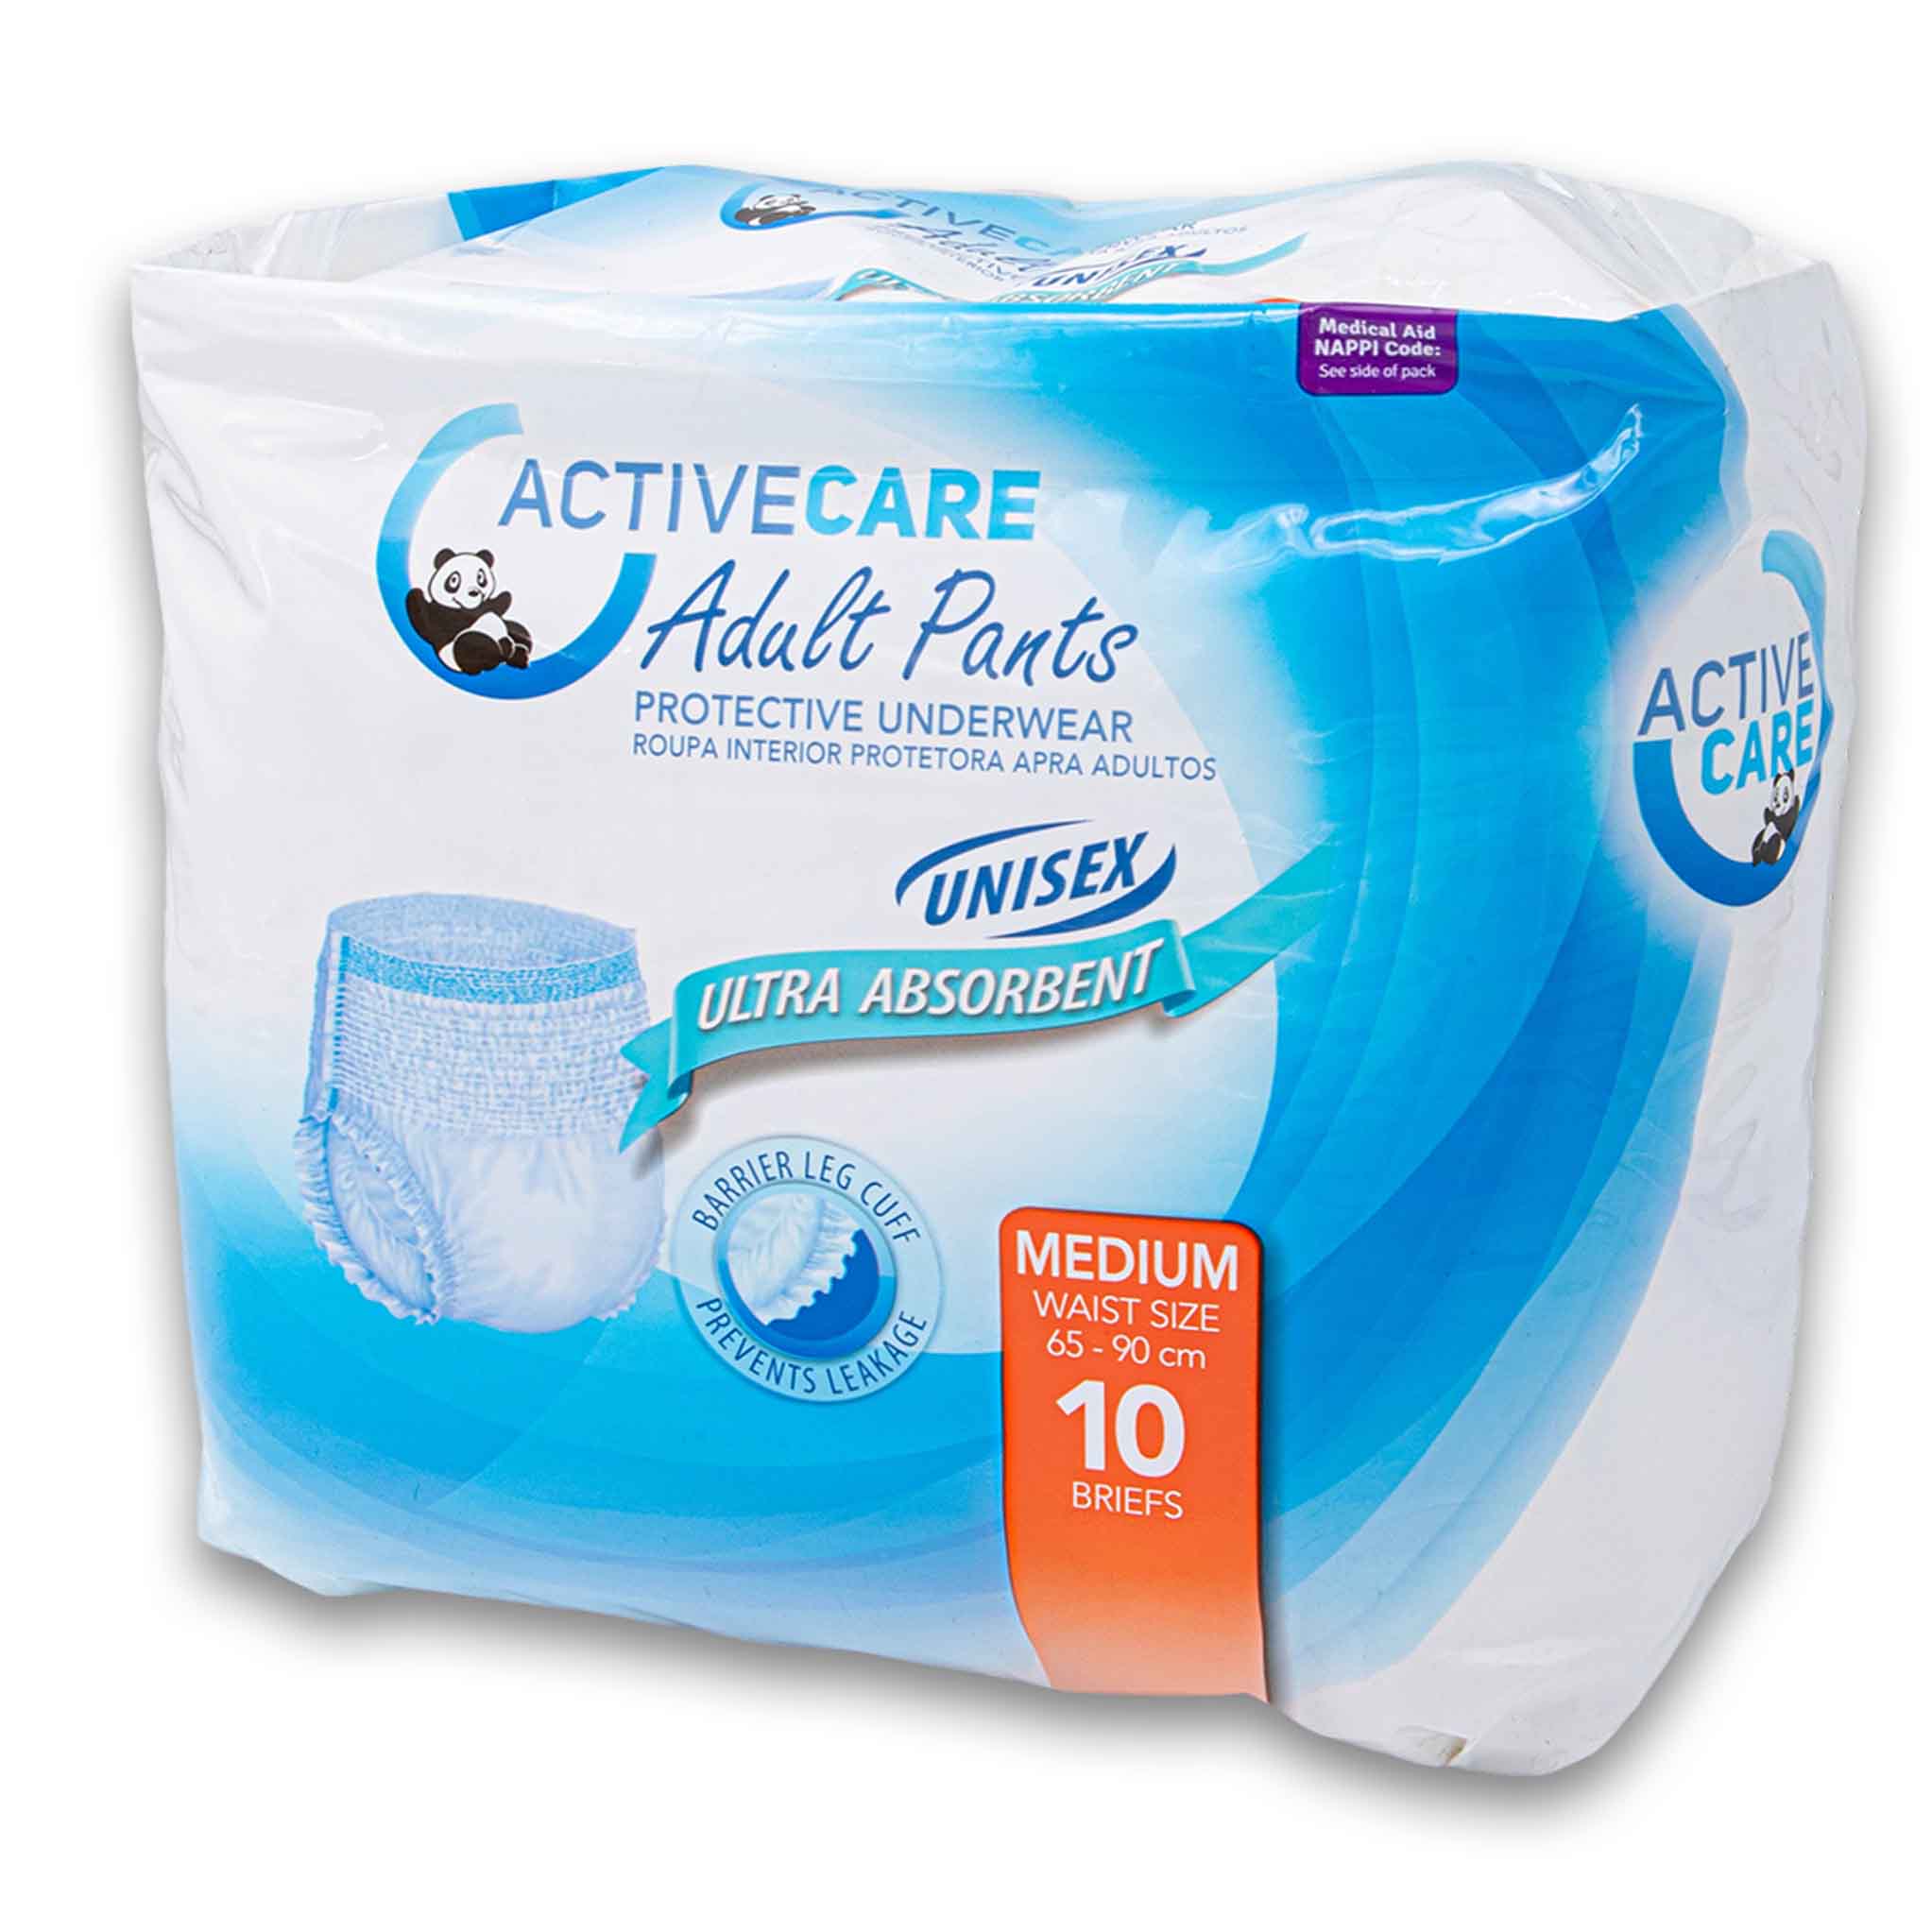 Active Care, Adult Pants Protective Underwear Medium 10 Pack - Cosmetic Connection